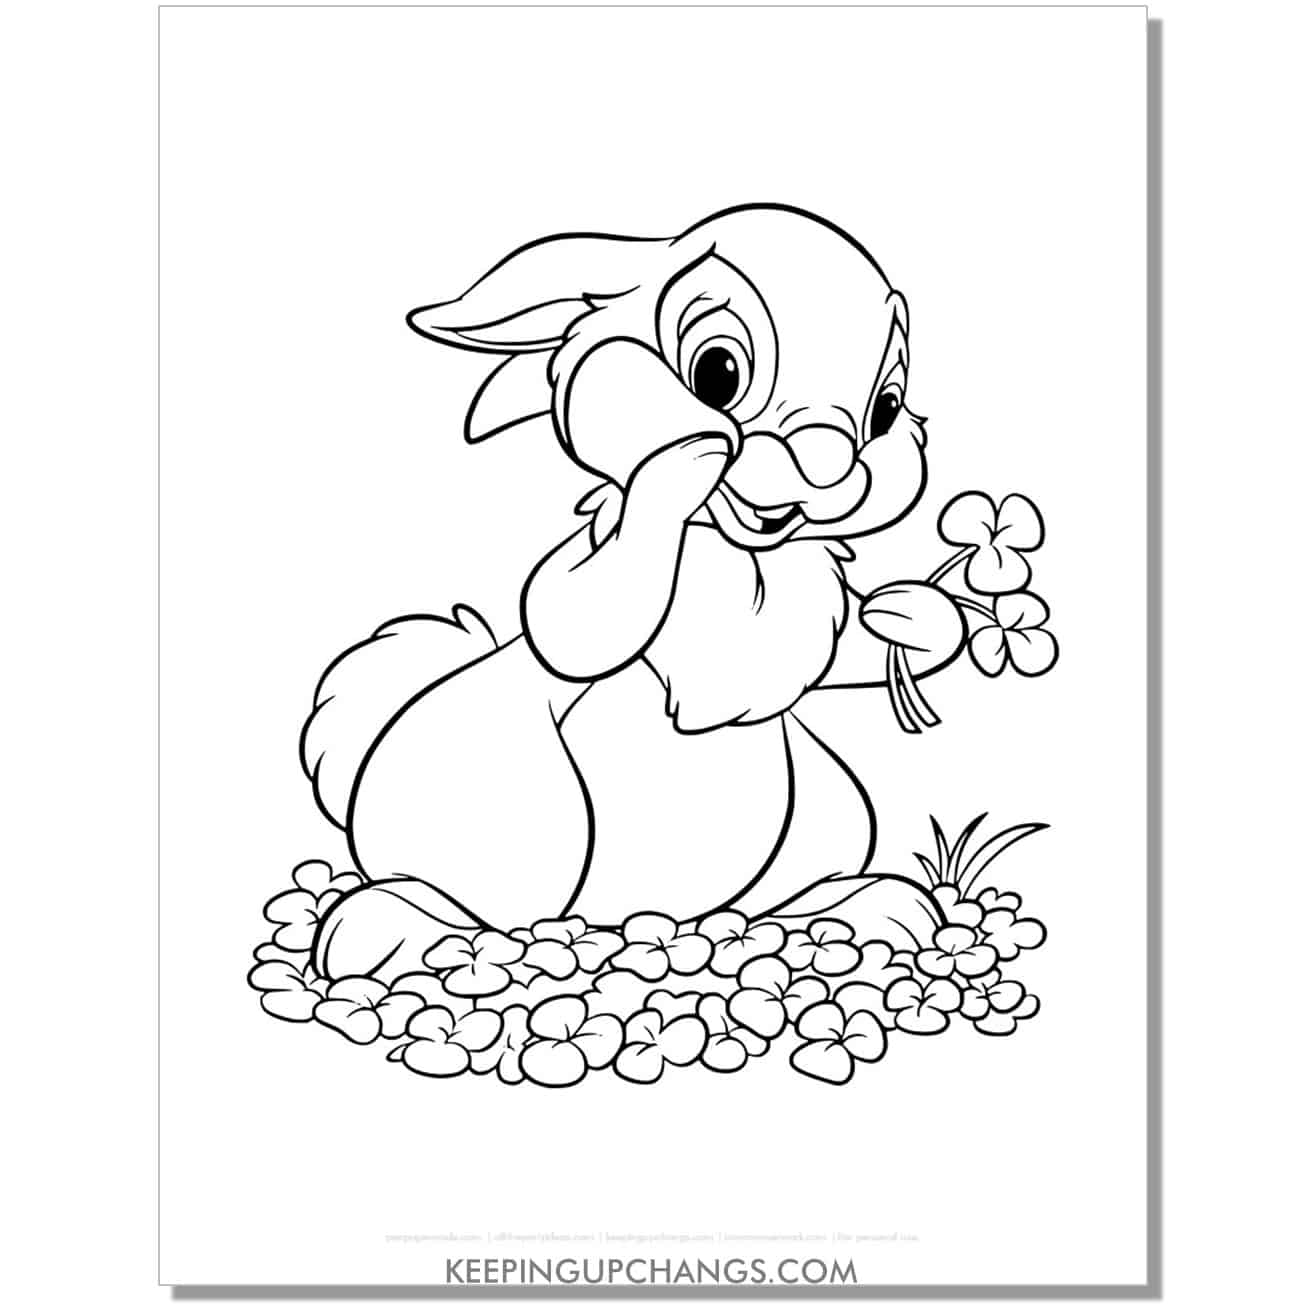 free thumper holding flowers coloring page, sheet.